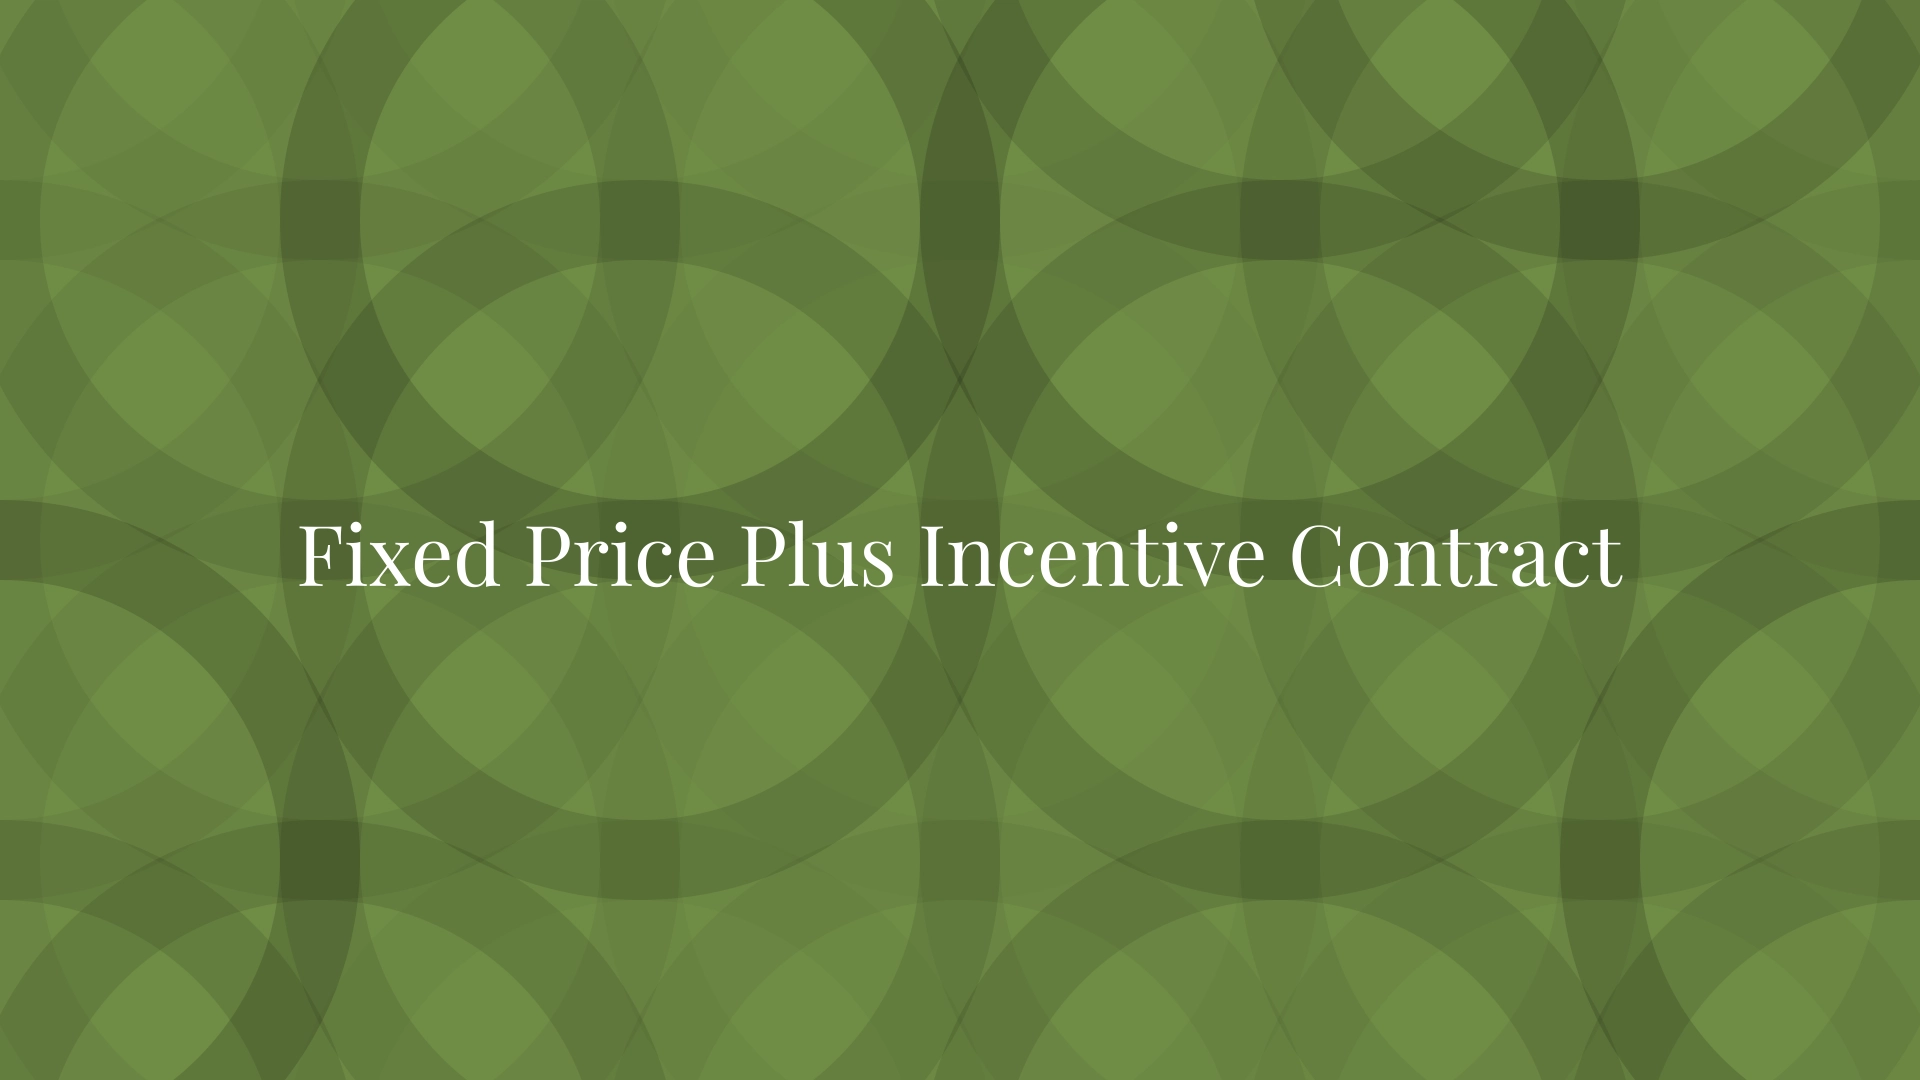 Fixed Price Plus Incentive Contract